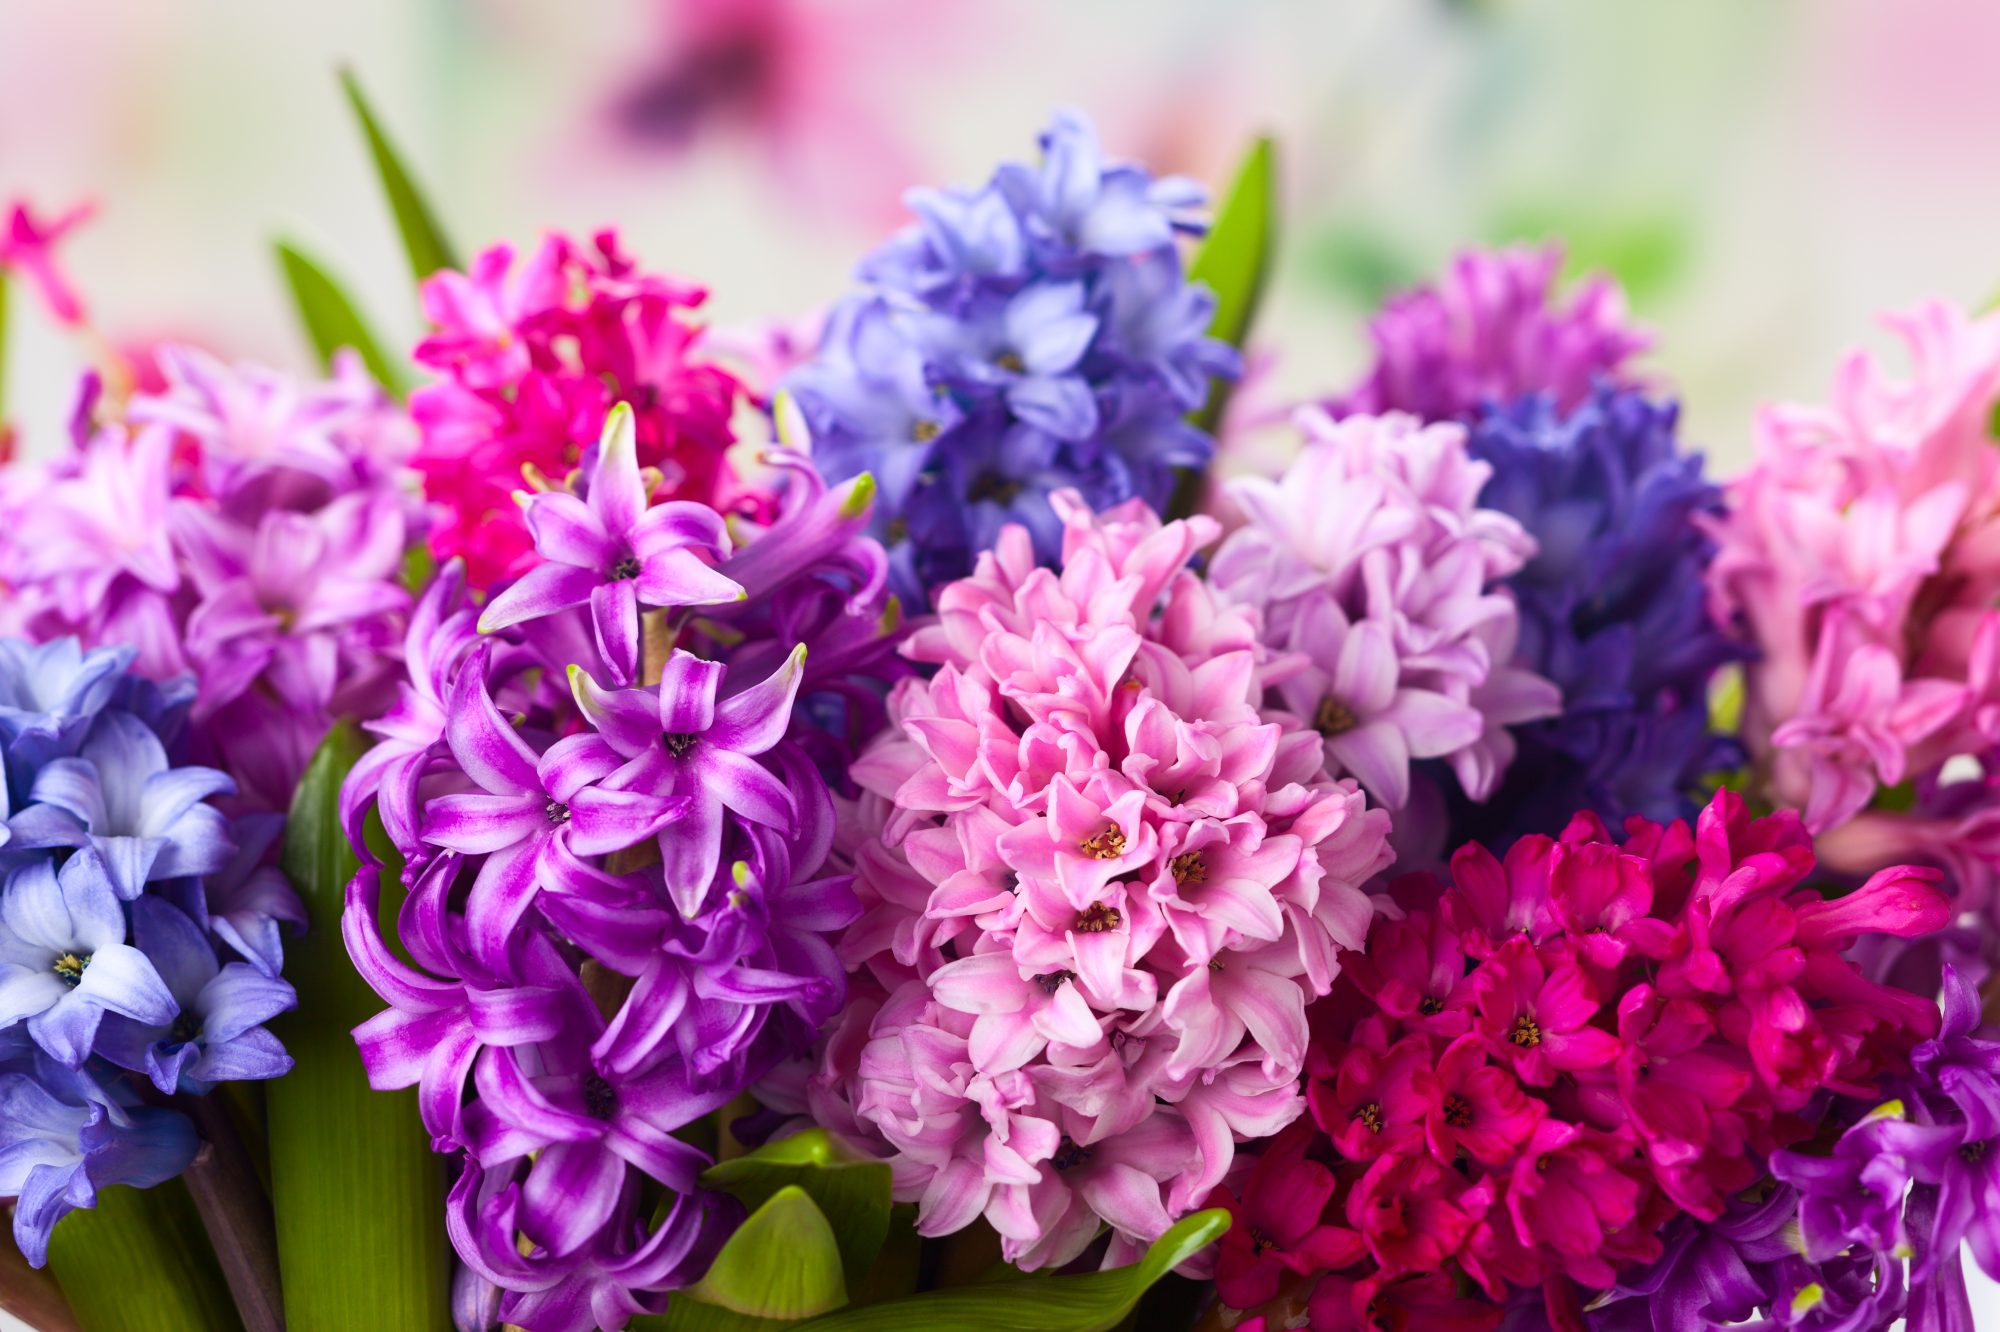 Why Are Hyacinths Referred As Nature's Perfume?